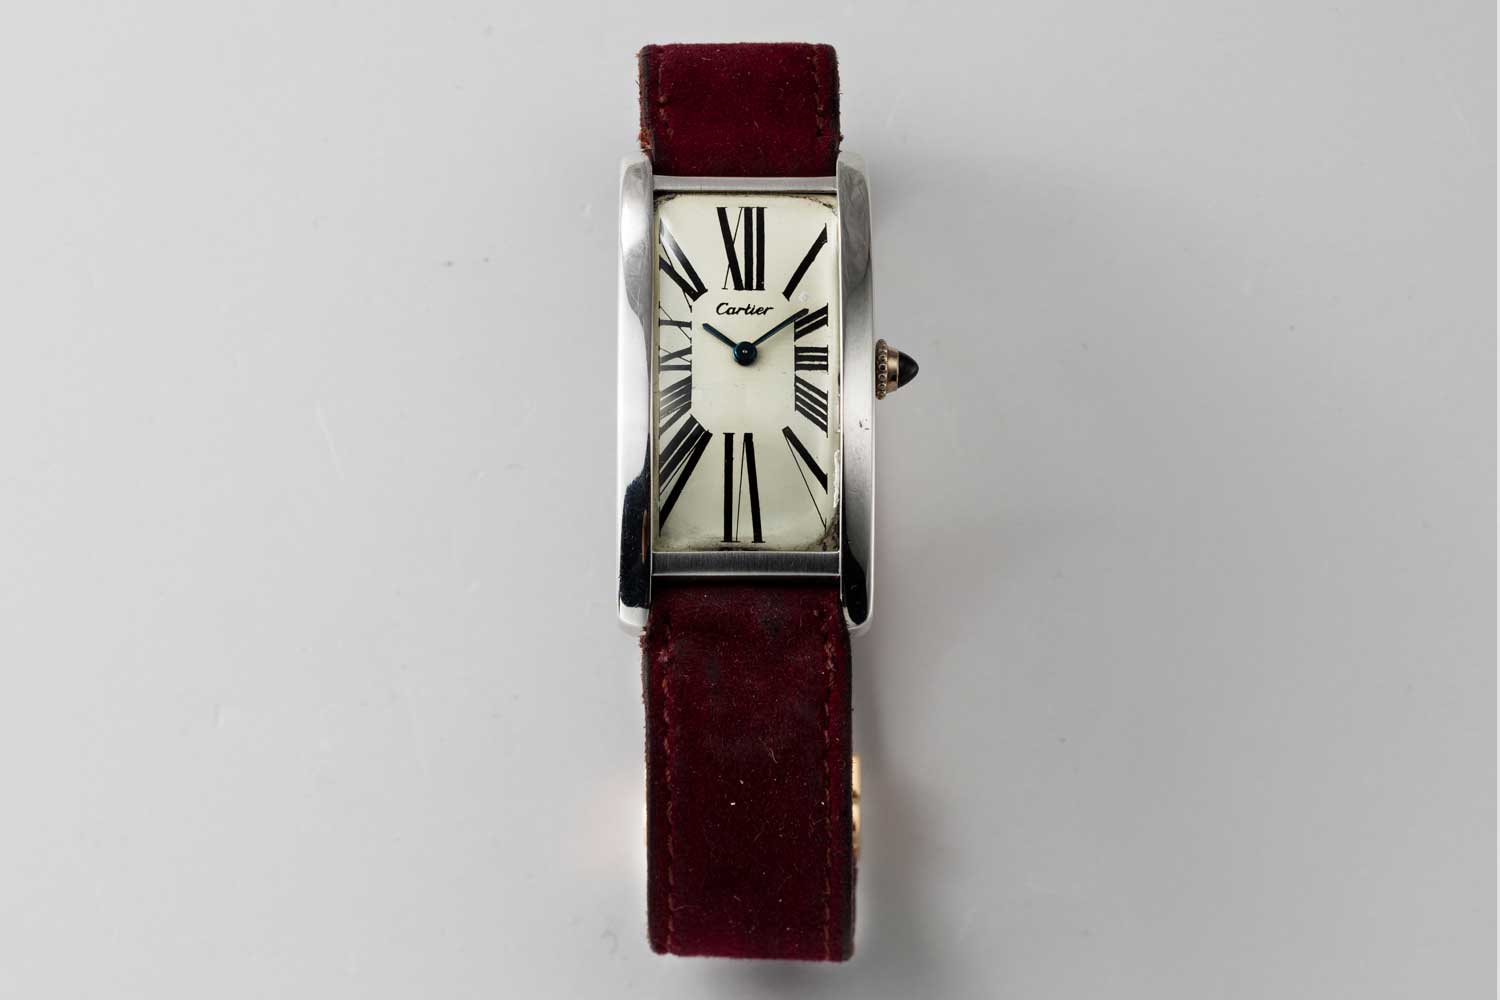 A 9-lignes, 1970 London Cartier Tank Cintrée in the rarer white gold case; this particular example is from the private collection of Auro Montanari (©Revolution)